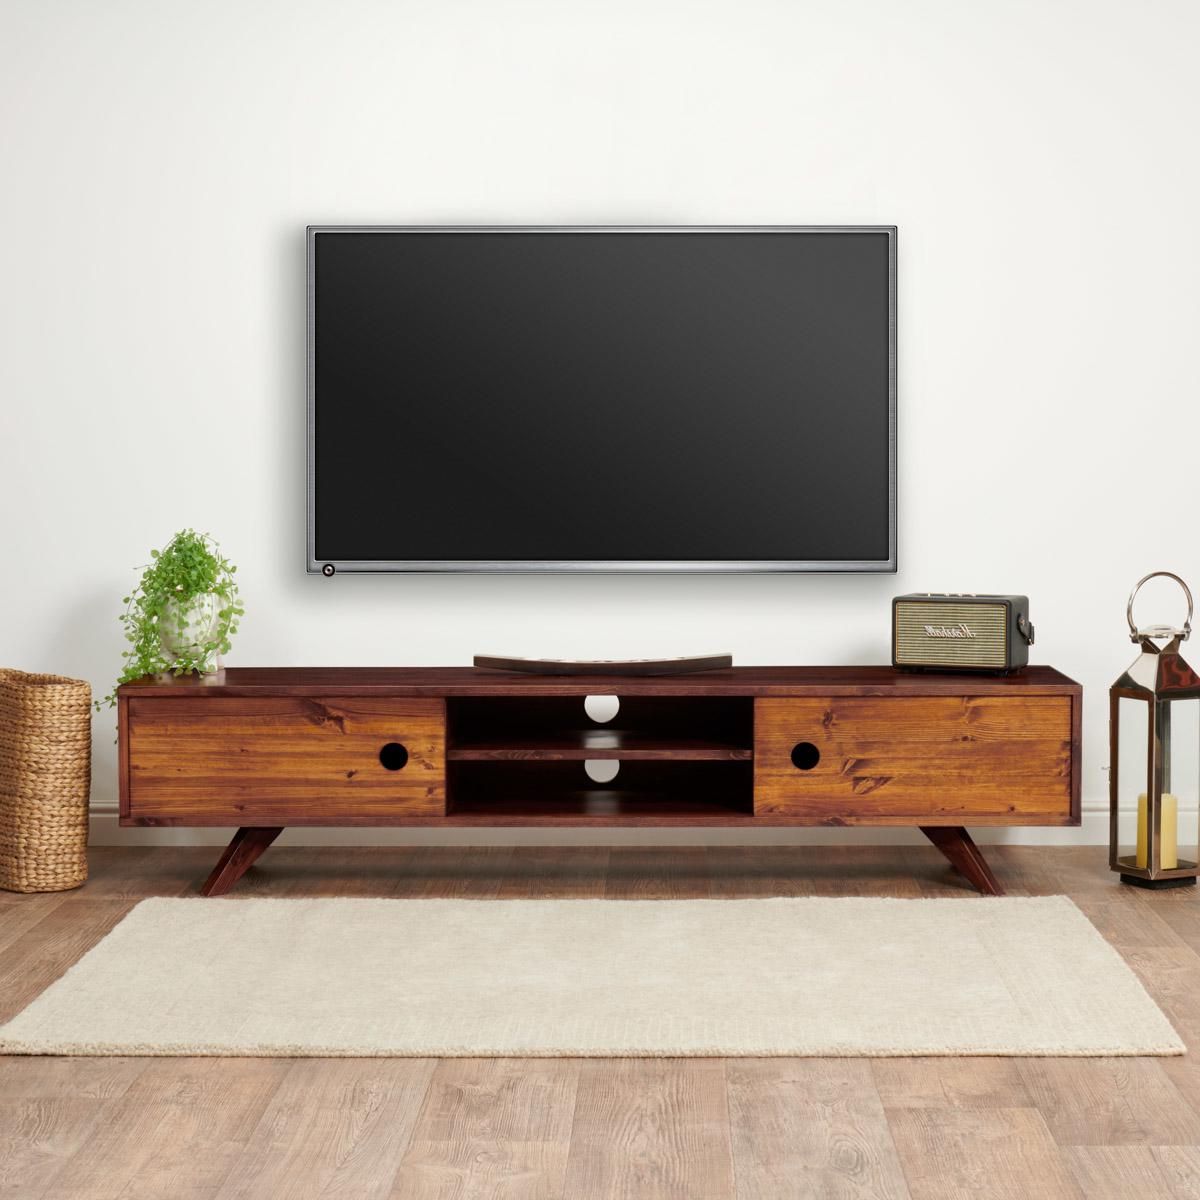 Solid Wood Tv Unit With Storage | 180cm Wide | Handcrafted Throughout Wide Entertainment Centers (Gallery 14 of 20)